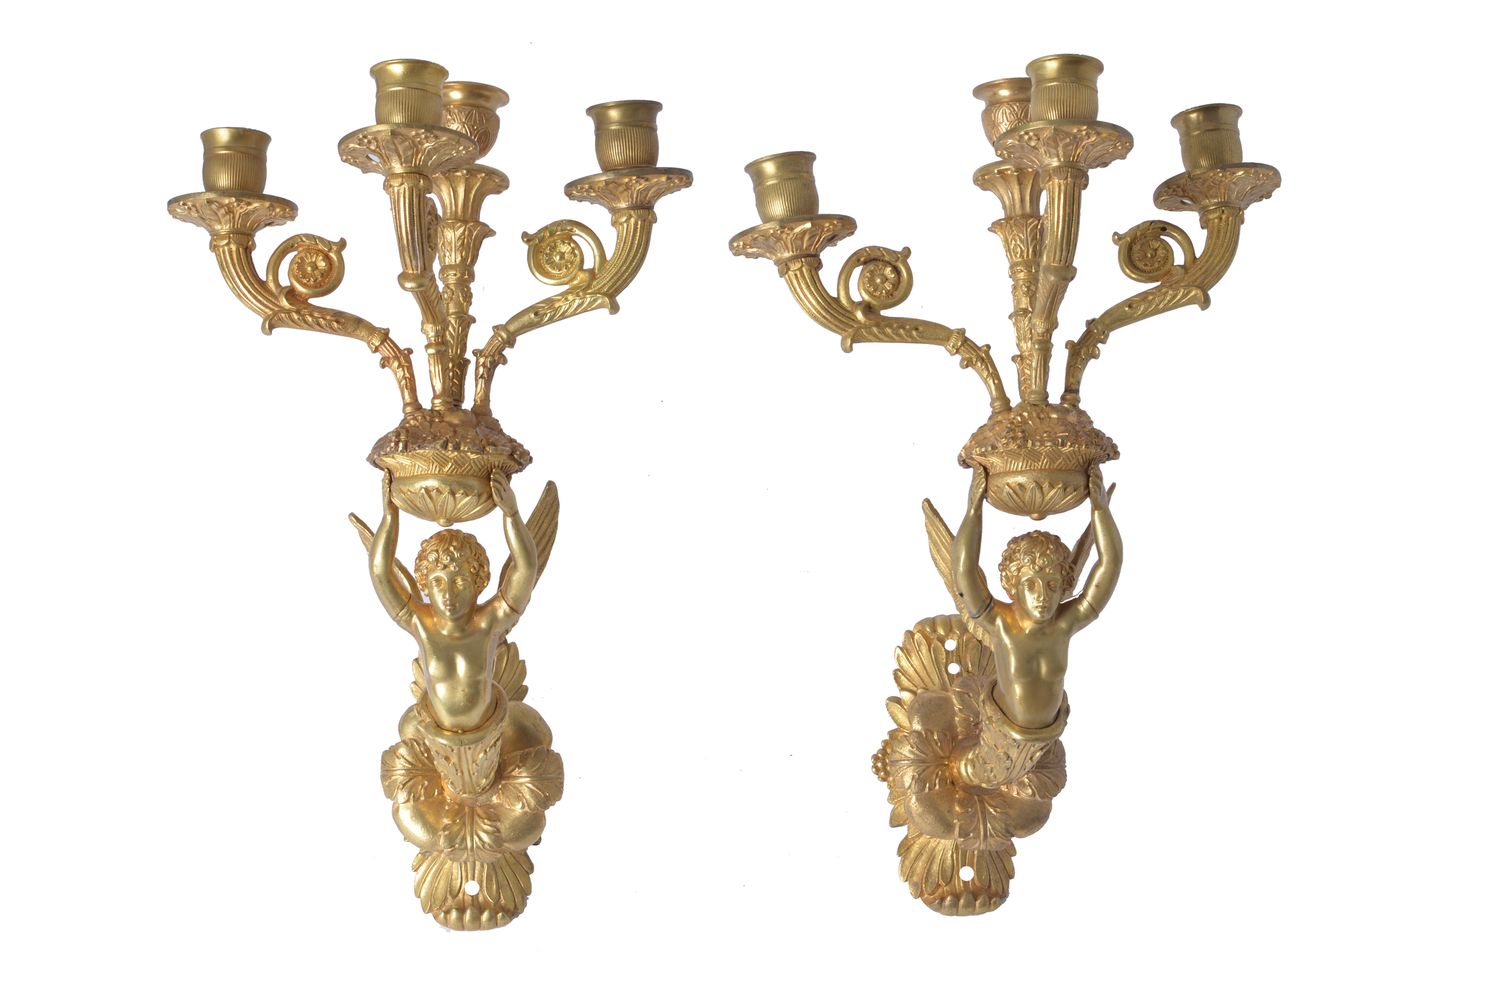 A pair of Empire or Restauration gilt bronze four light wall appliques in the manner of examples by - Image 2 of 3